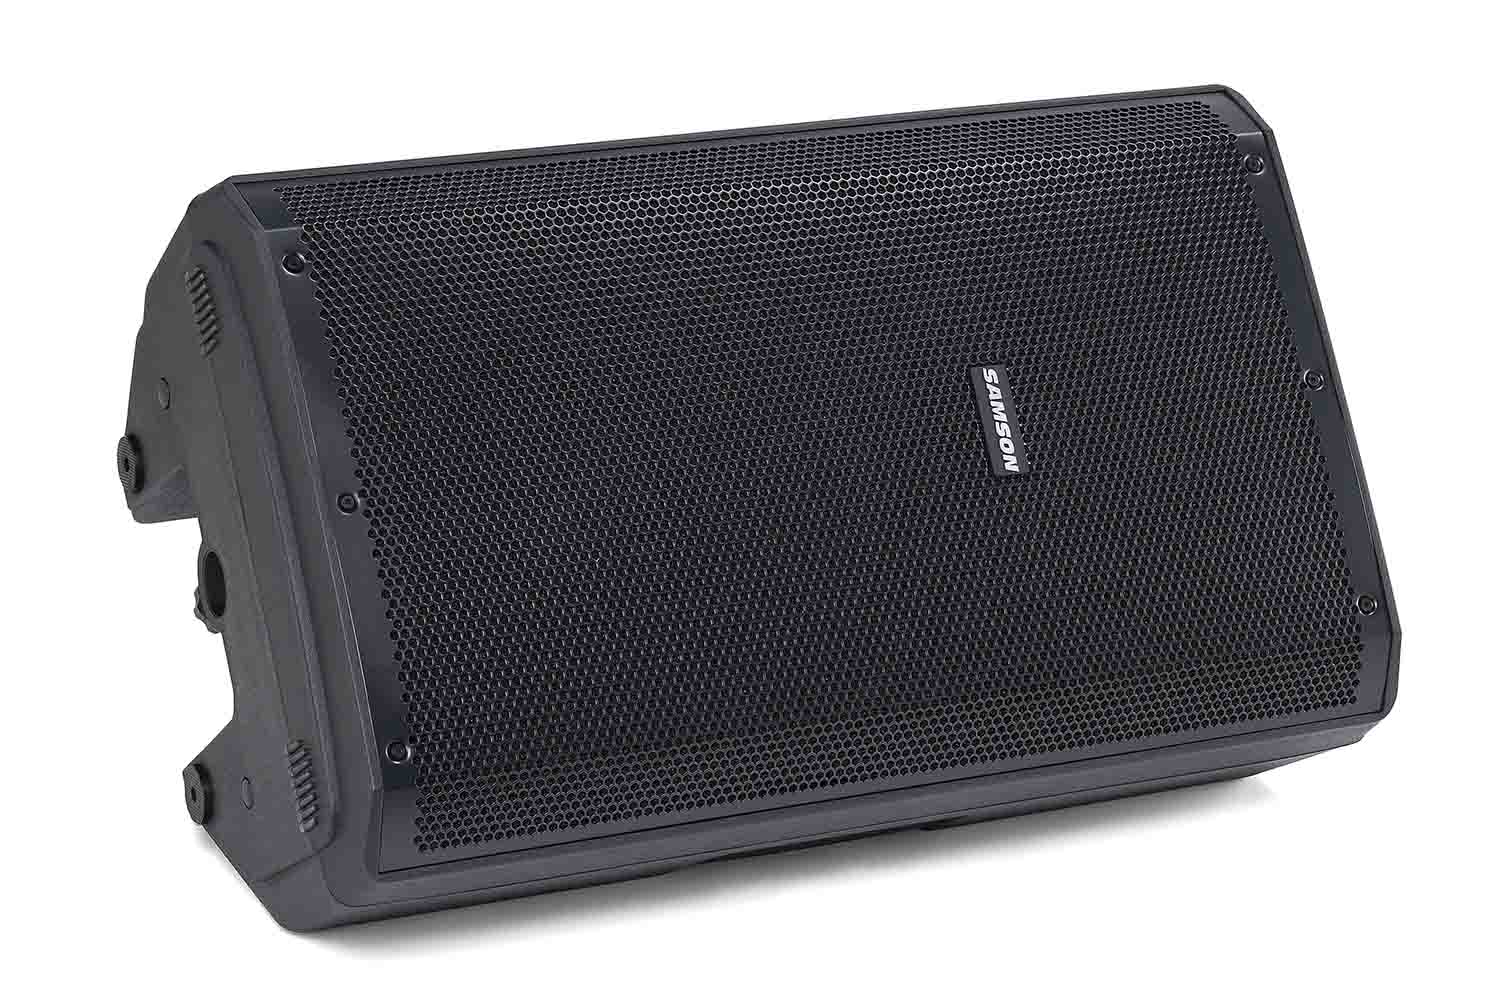 Samson RS115A 400W 2-Way Active Loudspeaker with Bluetooth - 15 Inch - Hollywood DJ